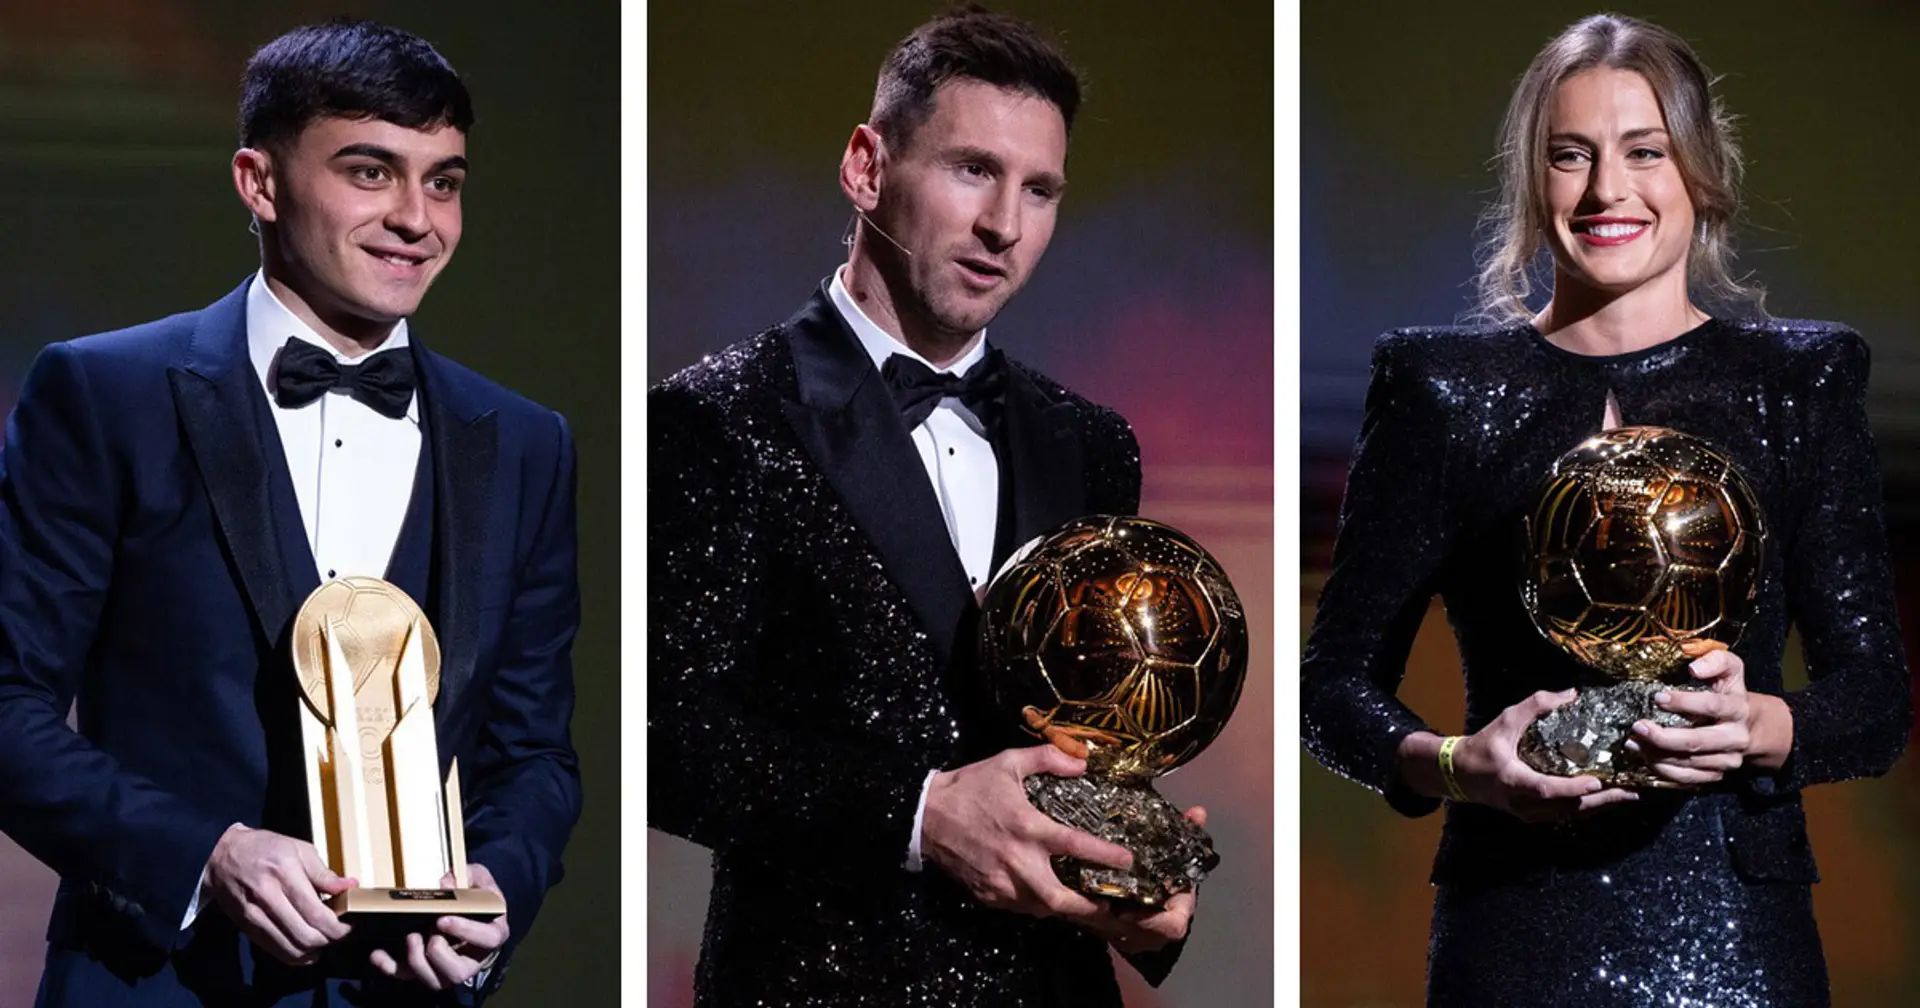 Barca dominate Ballon d'Or gala and 5 more big stories you might've missed